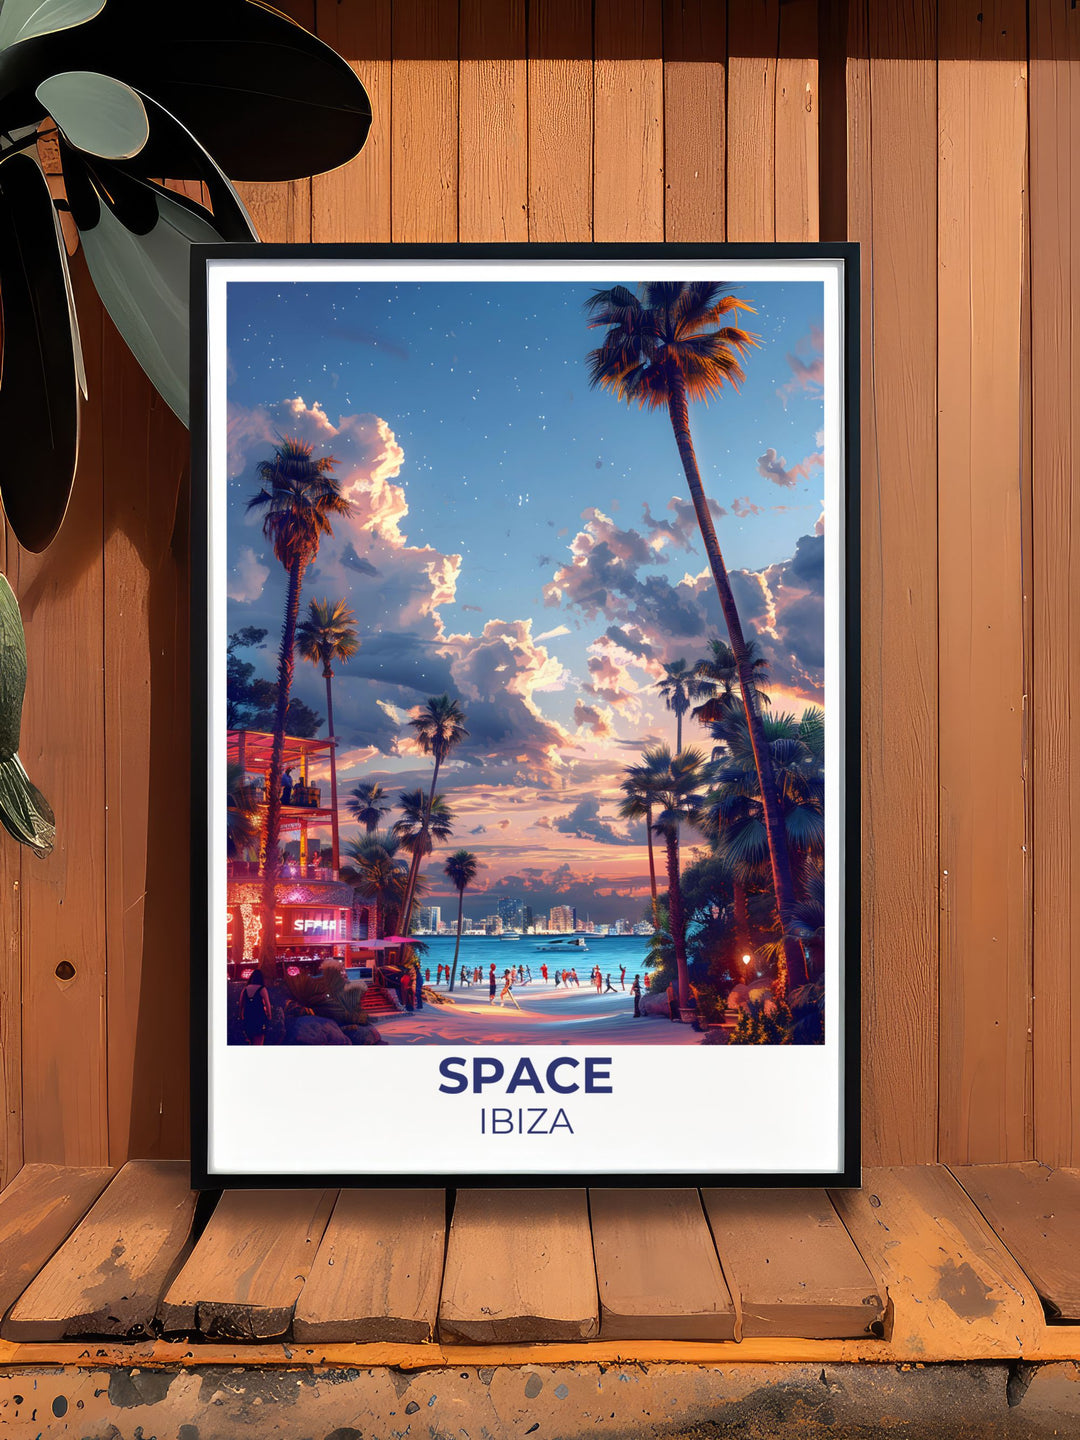 Customizable Terrace Prints let you bring a piece of Ibiza into your home. Personalize your artwork with scenes from Space Nightclubs Terrace, reflecting your unique experiences and memories of the islands legendary nightlife.